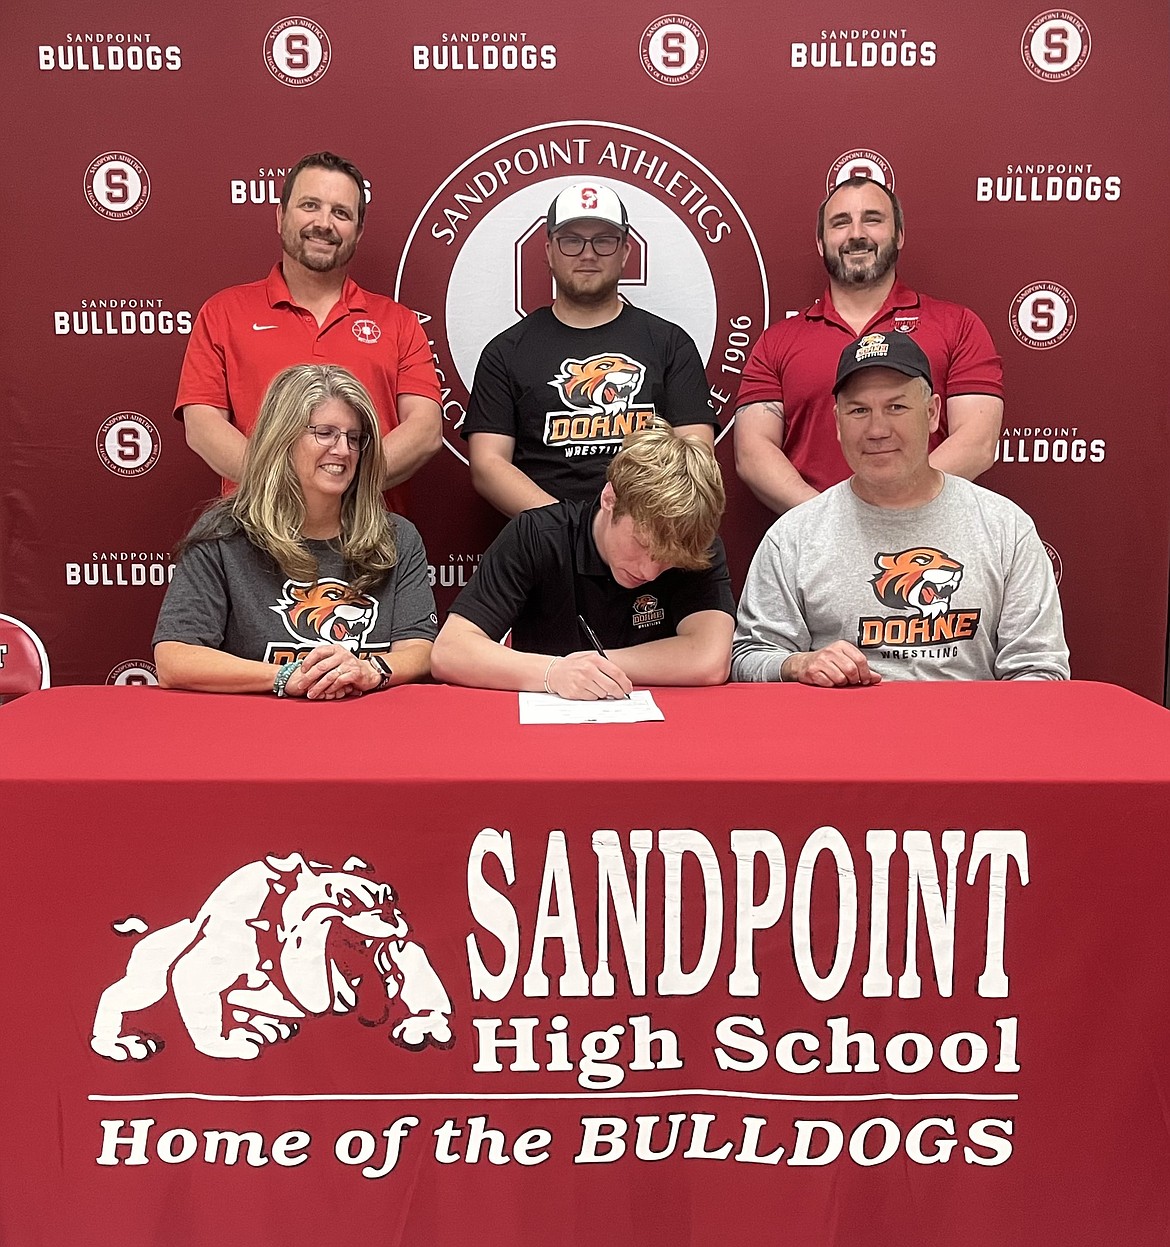 Sandpoint standout Shane Sherrill recently committed to continue his wrestling career at Doane University (NAIA) in Crete, Neb. Sherrill was a four-year varsity competitor who compiled an unofficial high school record of 102-26. He is a two-time 4A District 1-2 Champion (138 pounds) and also finished second at 132 pounds his freshman year. At the 4A state tournament this past season, Sherrill finished an impressive third and was fifth the year prior. Sherrill wrestled to five major tournament wins throughout his career: Ted Kato (2024), George Wild (2023 and 2022), Conrad Garner (2023), Bob Mars (2022). Also of note, he finished sixth at the North Idaho Rumble and was fifth at Tri-State during his senior season — some of the largest tournaments in the Pacific Northwest. Outside of the regular season, Sherrill wrestled for Bonners Ferry Wrestling Club where he picked up 31 championship titles dating back to his middle school years. He was also a three-time Fargo National qualifier (USA Nationals) where he helped Team Idaho to their first ever national title in the summer of 2023. Sherrill will look to contribute in a big way for the Tigers, who won the Great Plains Athletic Conference title and were fifth at the NAIA National Championships this past season. Doane also produced four NAIA All-American Honors as a result of those feats. Surprisingly, Sherrill will be the second wrestler from North Idaho to compete in the GPAC… Waldorf University will be joining the conference next year, which is where Bonners Ferry alumni Jackson Rickter currently wrestles. Follow these and other athletes’ progress in the weekly edition of the Daily Bee College Notebook. Pictured in the back, from left, are Sandpoint High Athletic Director TJ Clary, Blake Sherrill (brother), and Sandpoint High head wrestling coach Josh Ratigan. Alongside Shane are his parents, Sandra and Rob Sherrill.